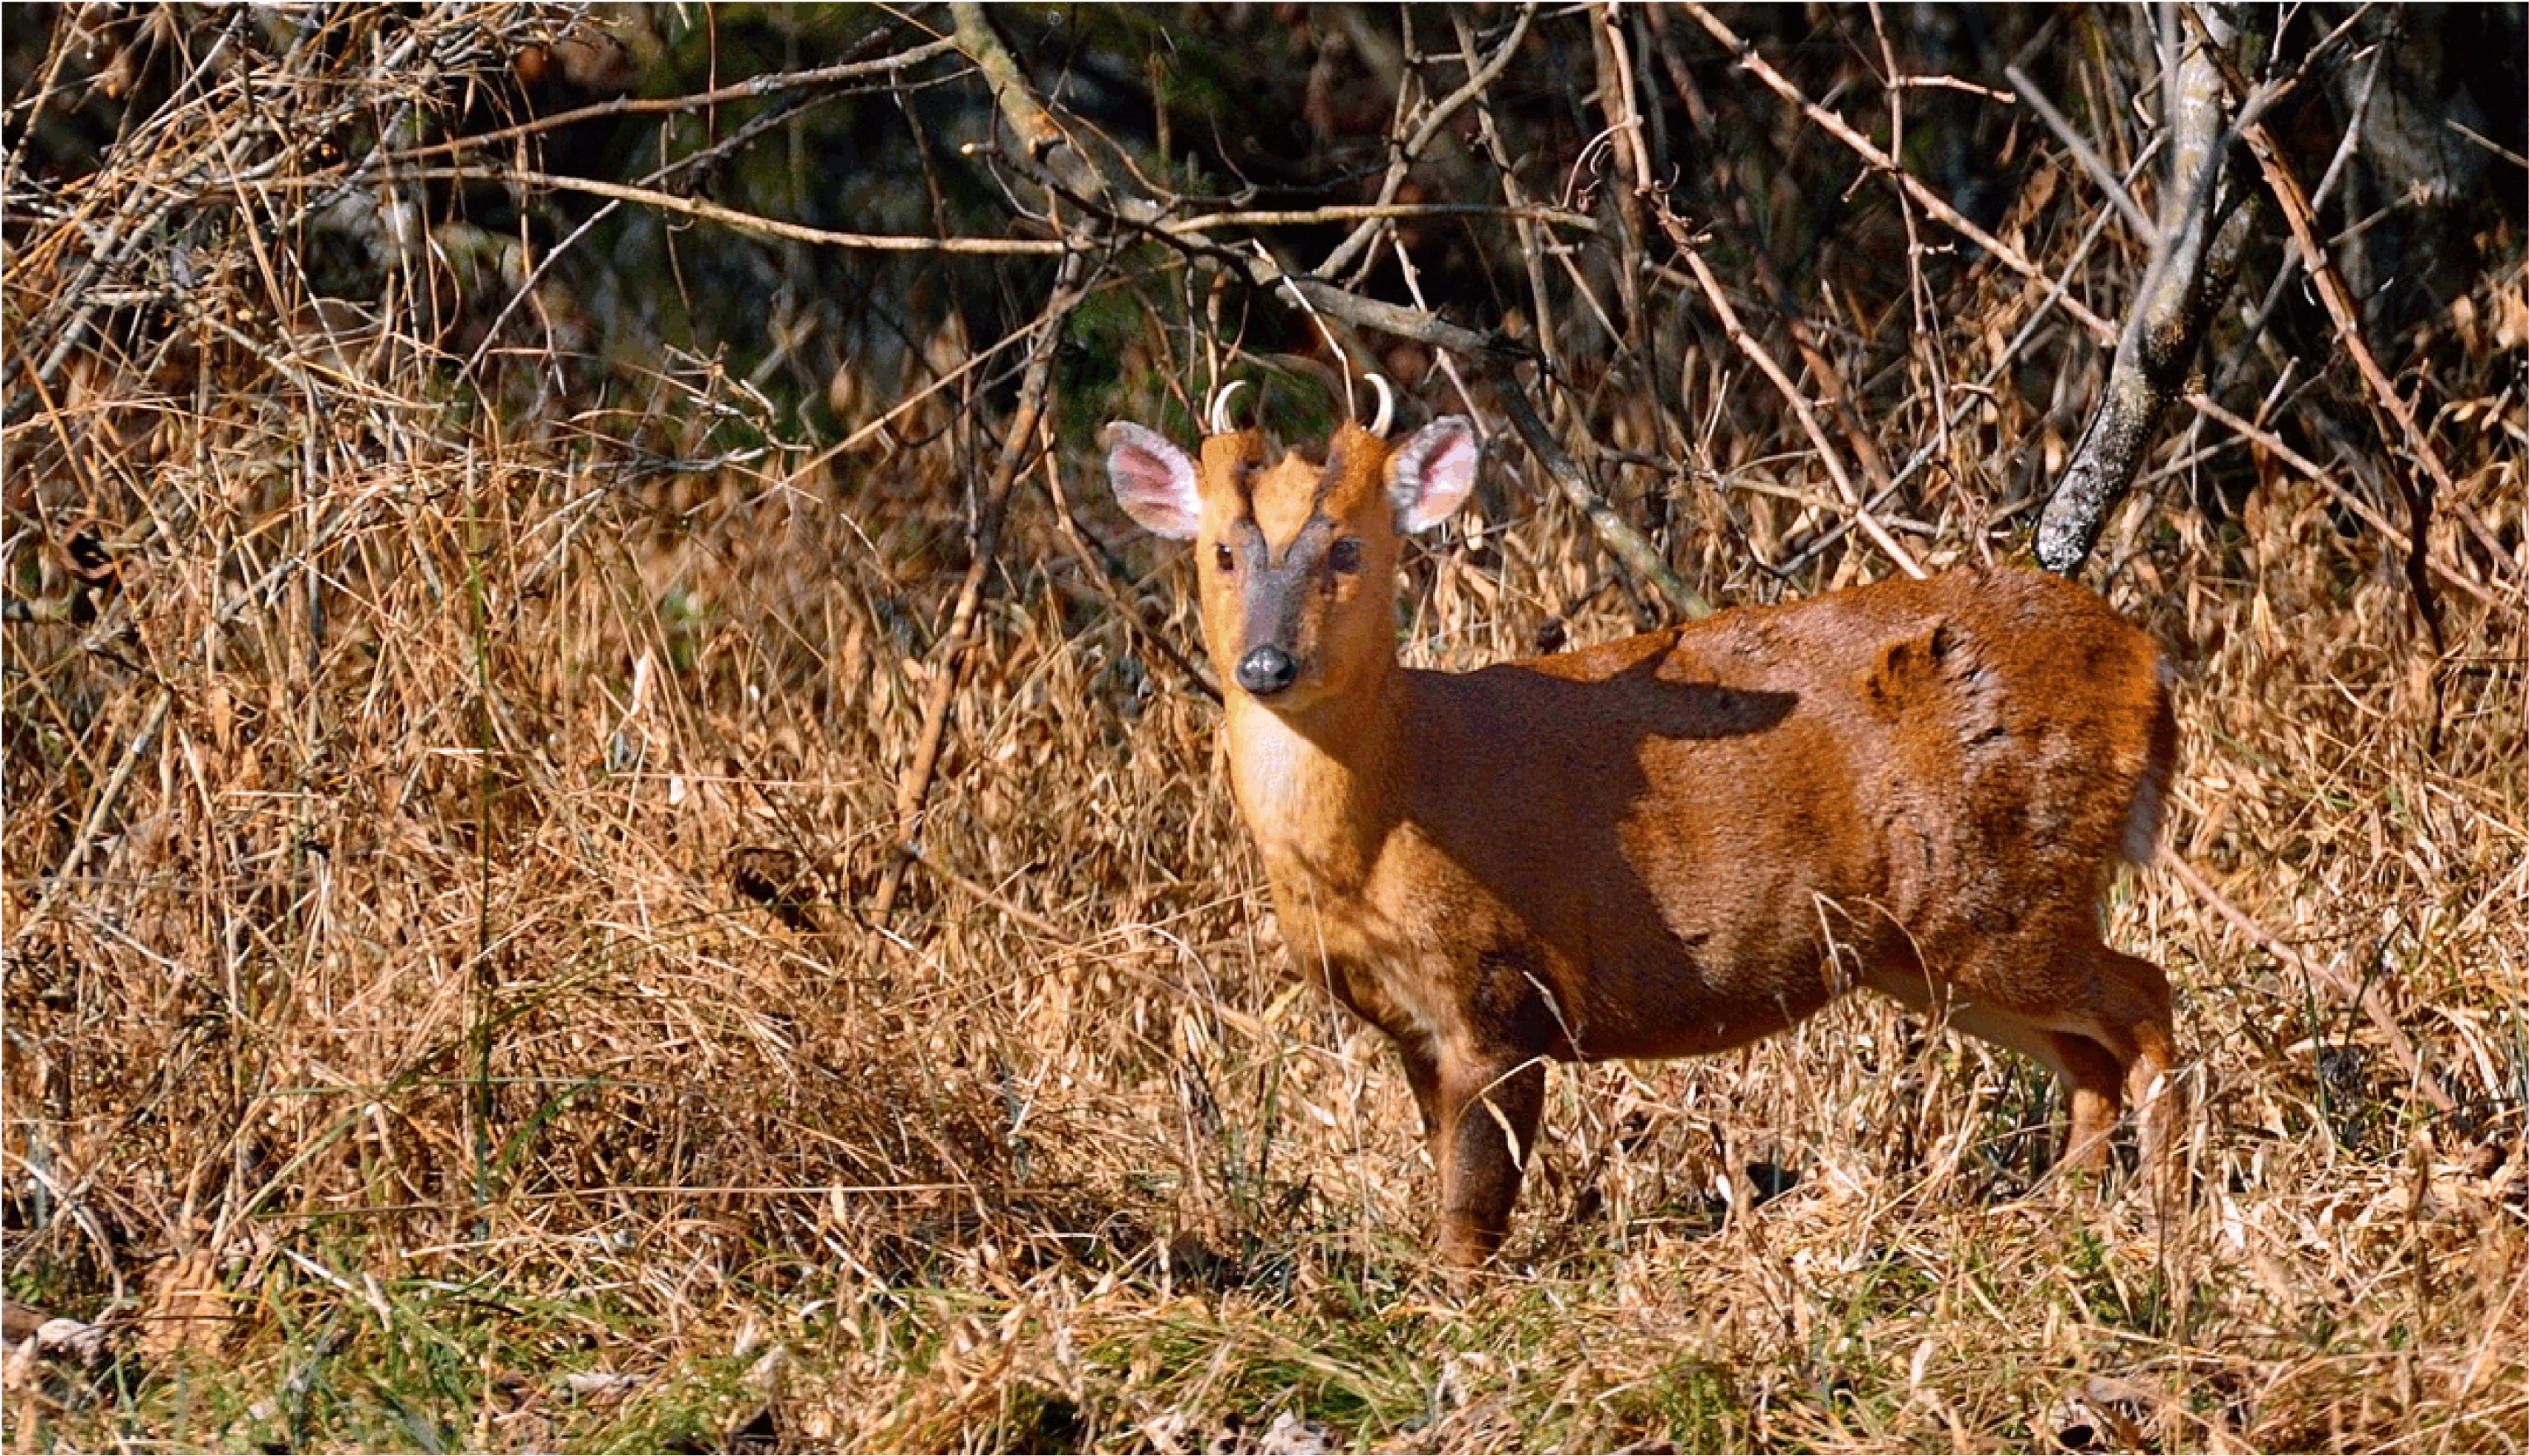 A freakishly small and supercute brown deer with tiny pointy horns